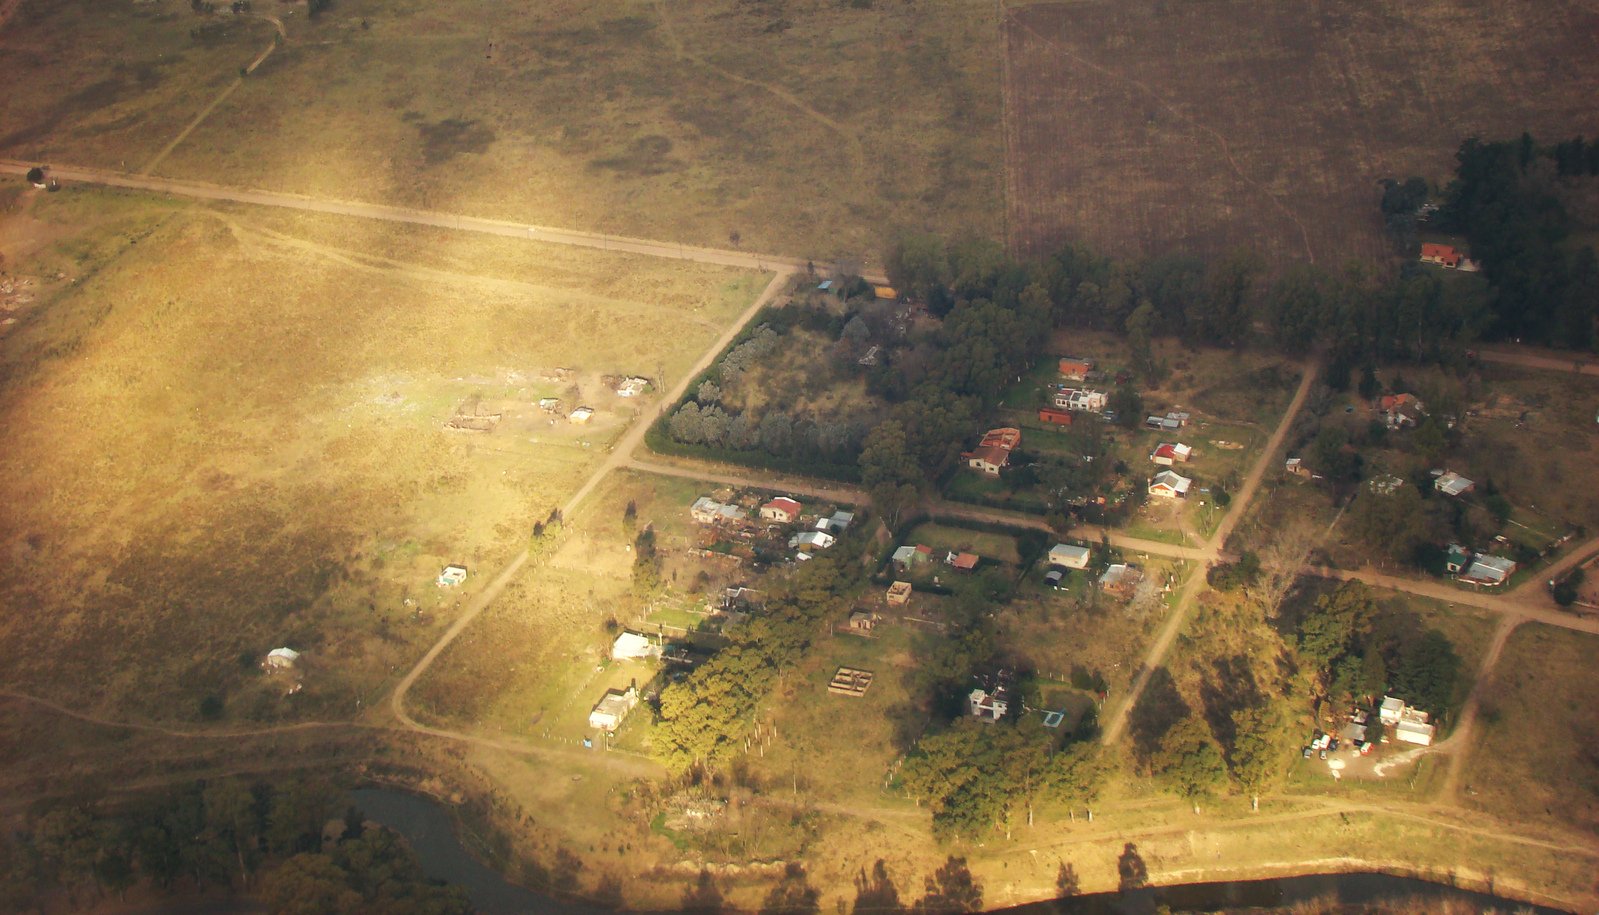 a po from an airplane shows the area of some buildings and fields